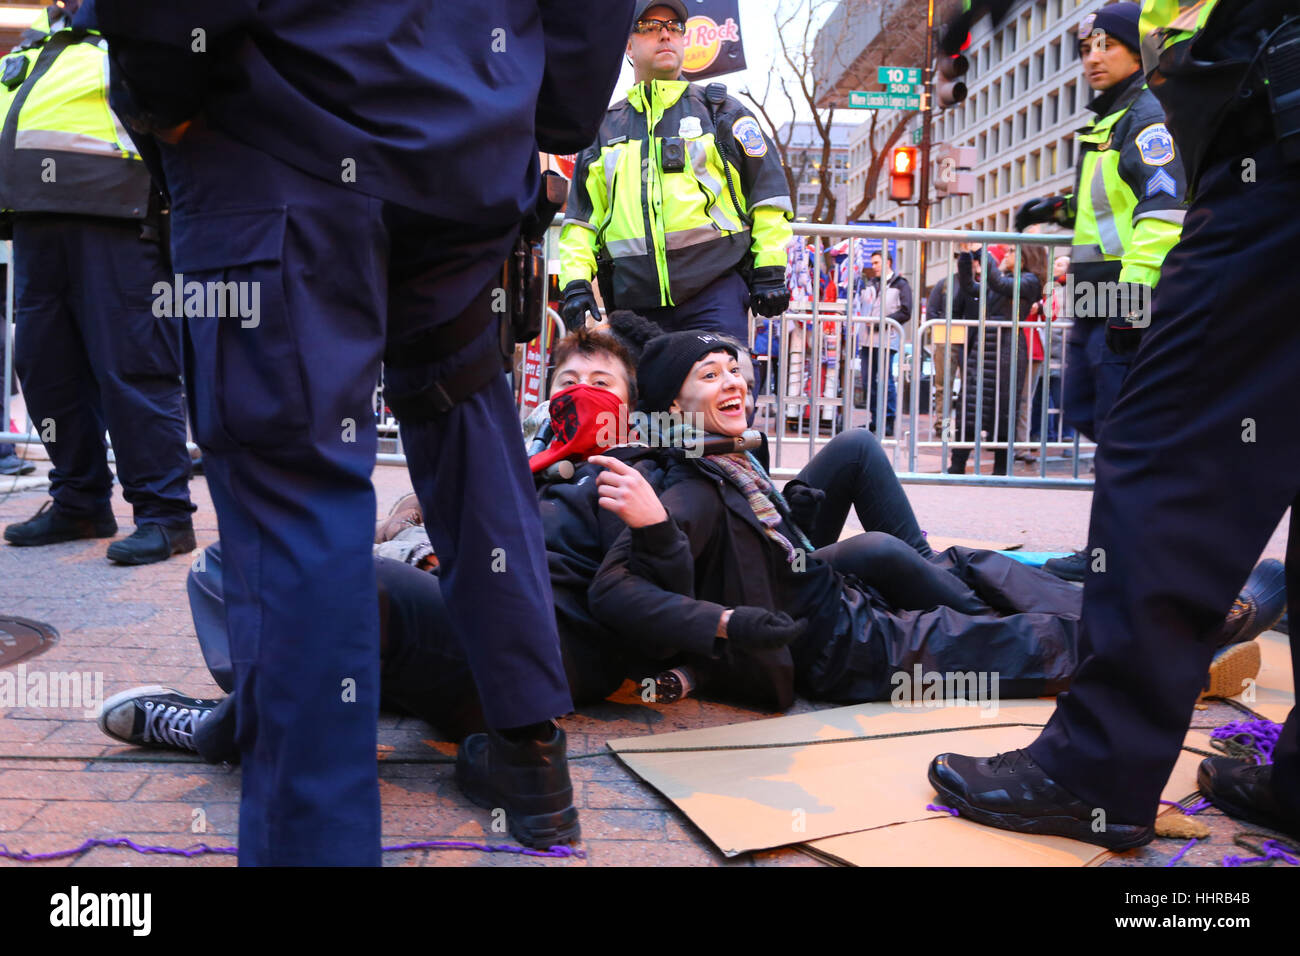 Washington DC, USA. January 20, 2017. Demonstrators use direct action techniques--U locks locked around their necks--to stymie efforts by police to remove them from an Inauguration security checkpoint. The protesters, organized under The Future is Feminist, was one of several groups disrupting access to Trump's Inaugural Parade. Stock Photo